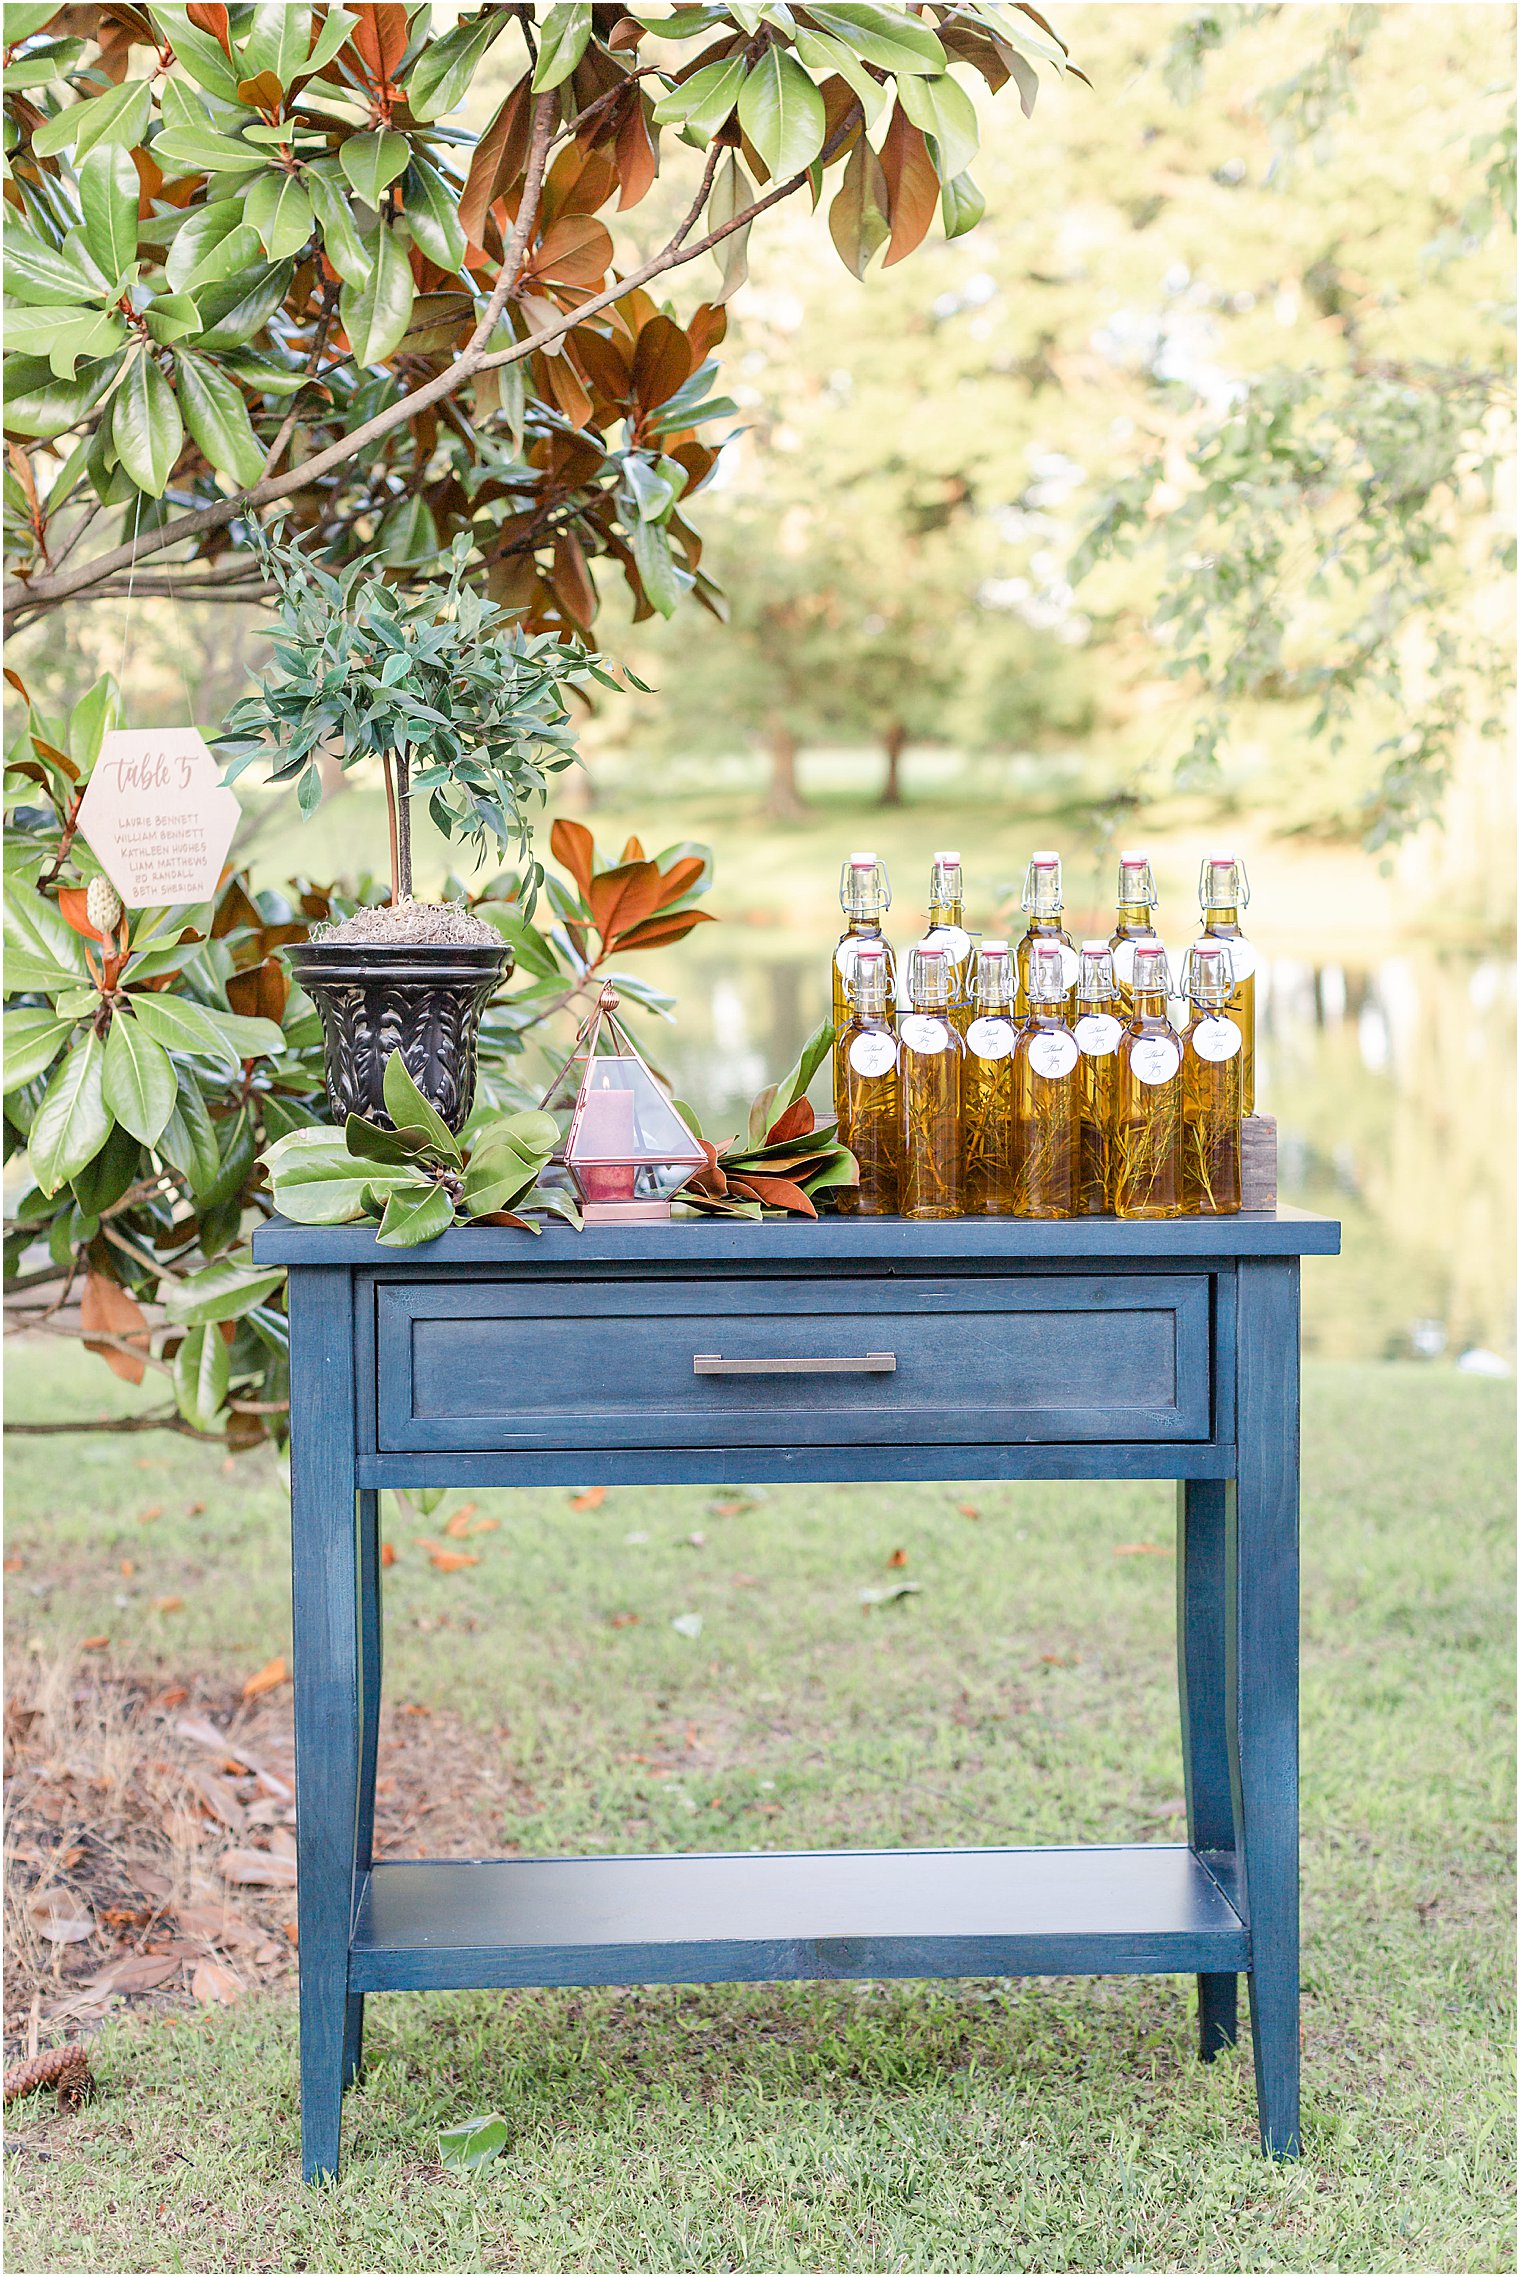 Wedding Favors of bottled olive oil and thyme displayed on blue table 